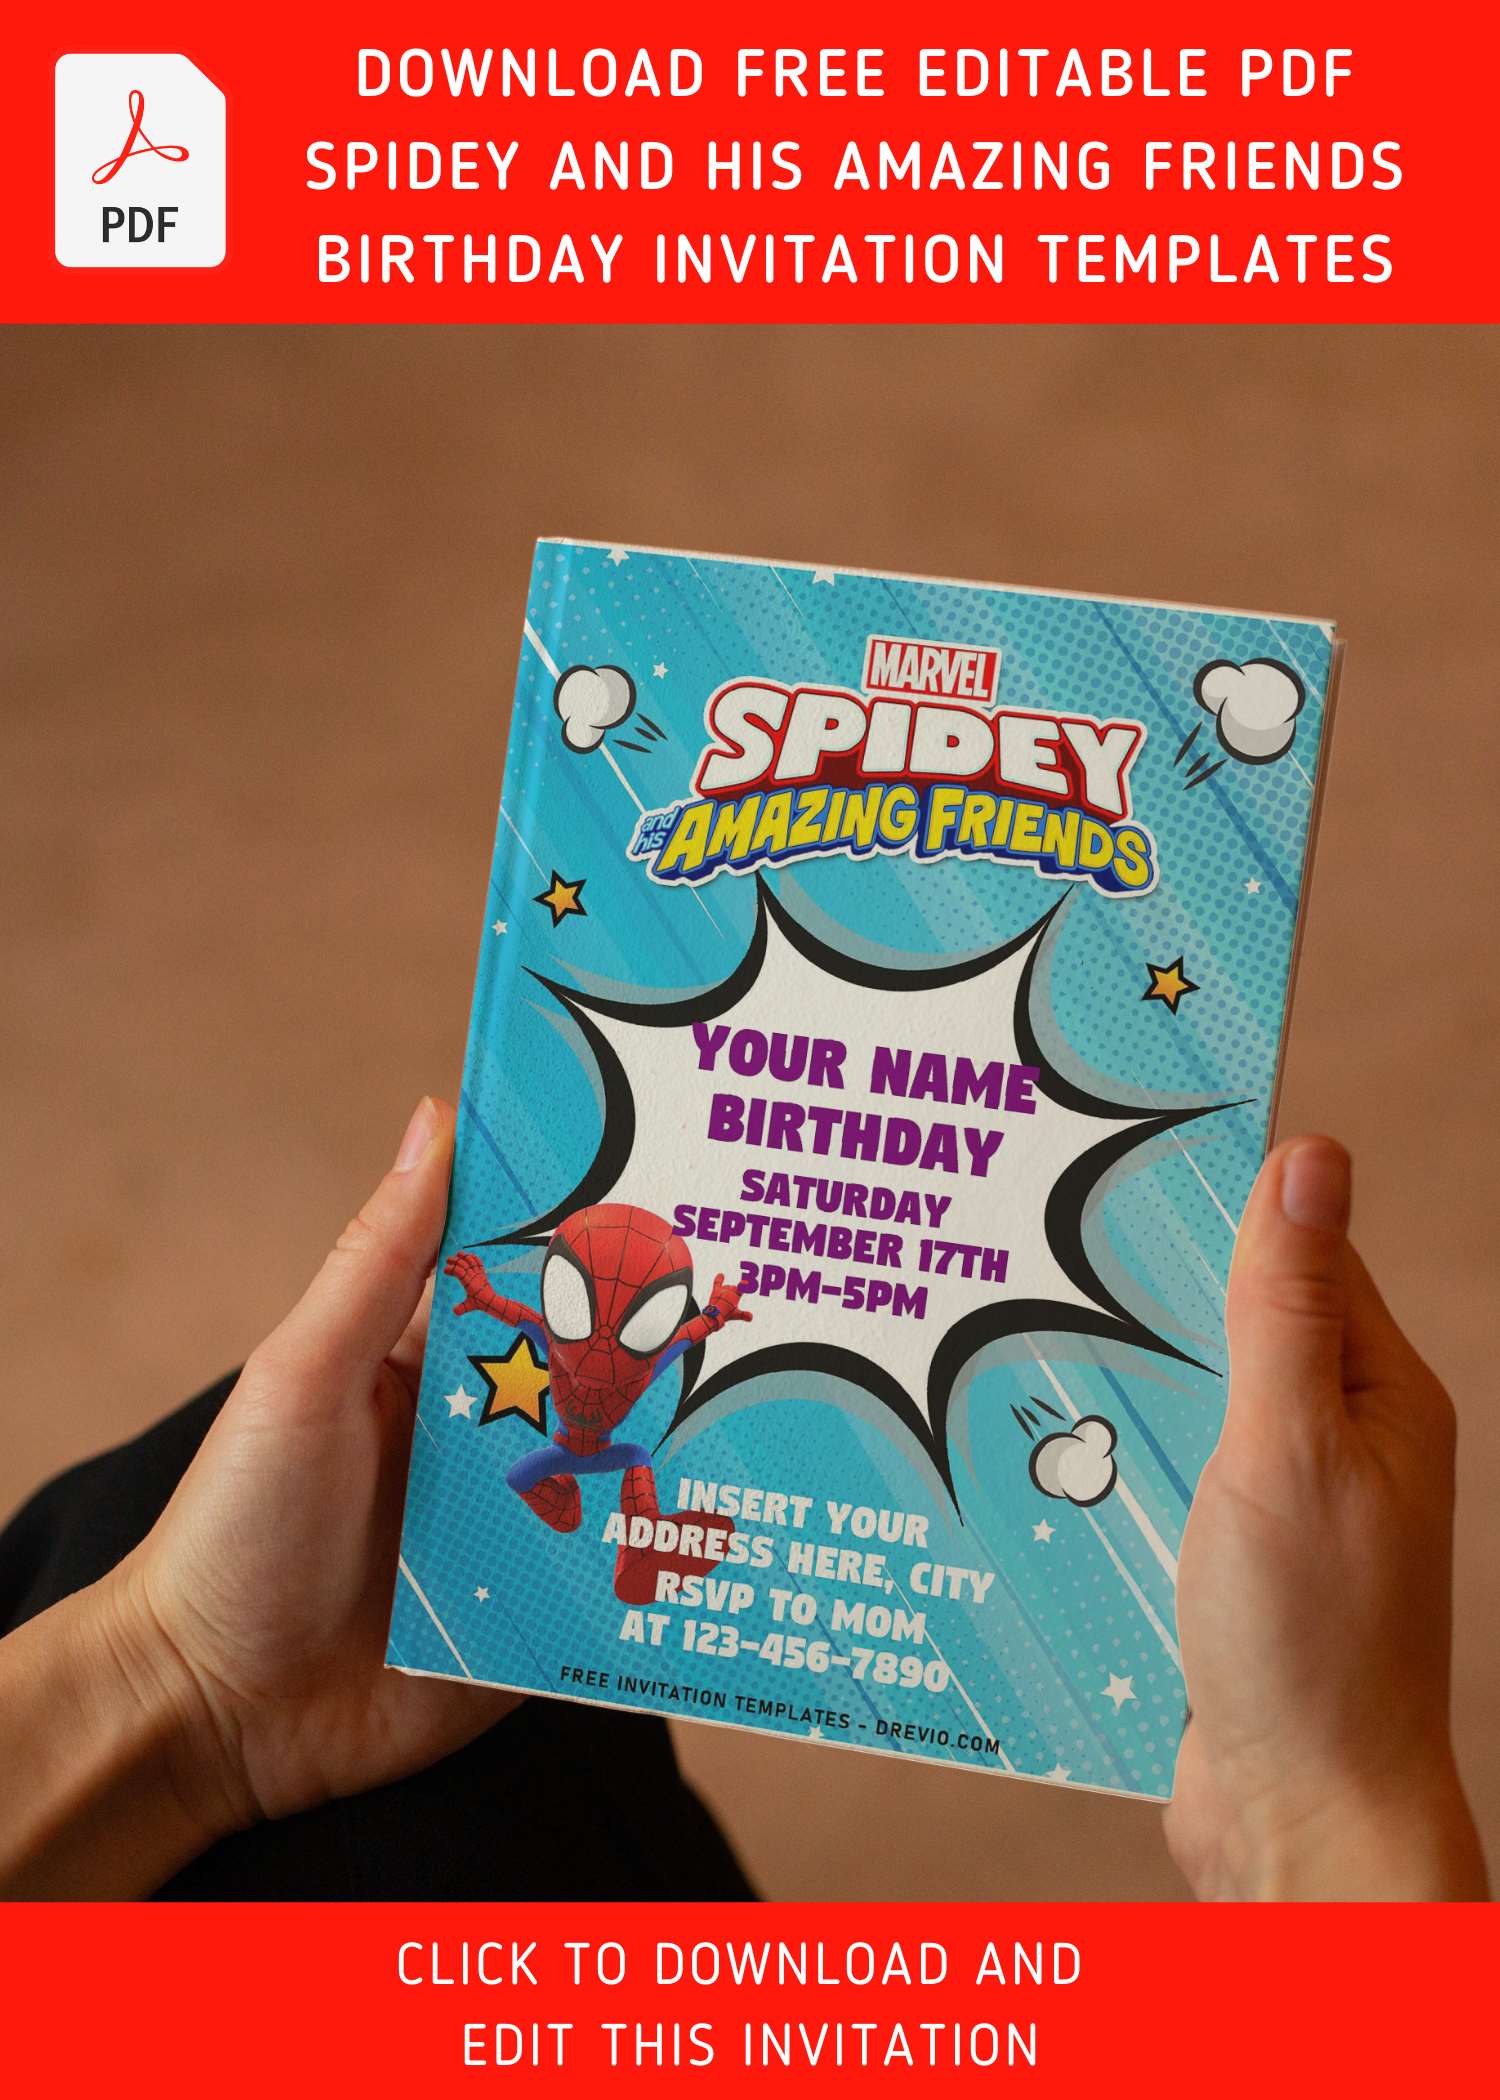 free-editable-pdf-epic-spidey-and-his-amazing-friends-birthday